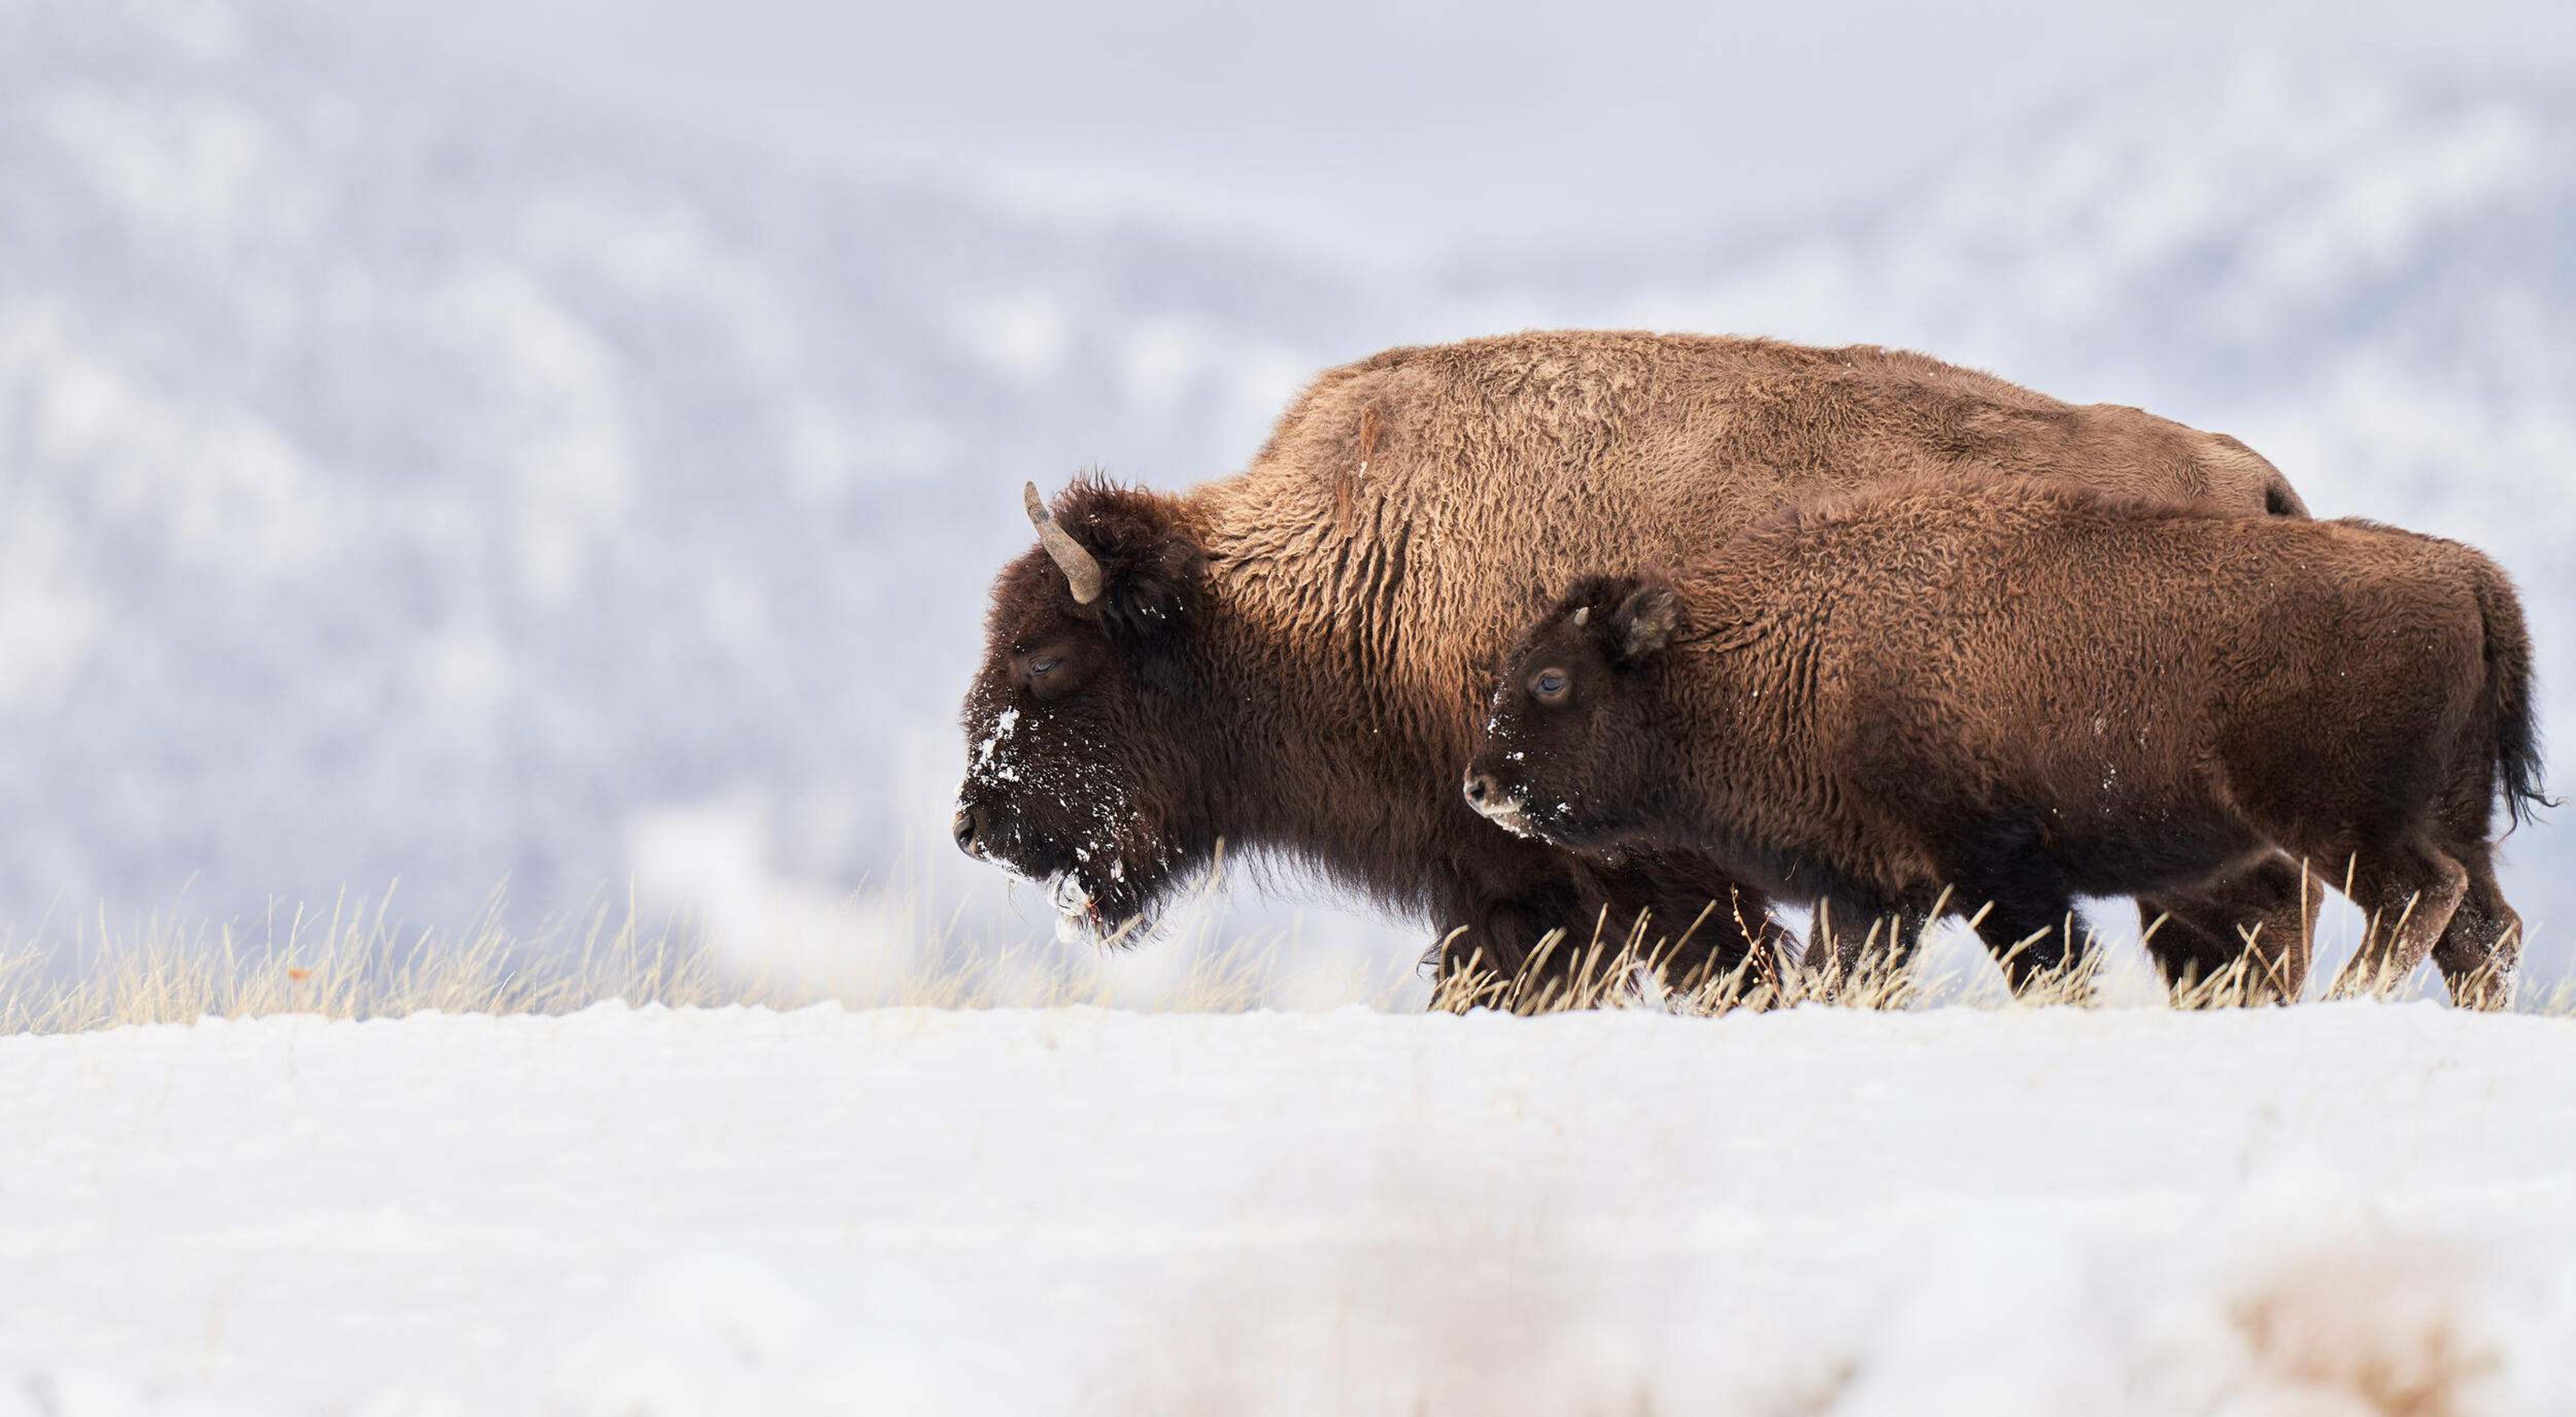 Bison and calf walking through the snow